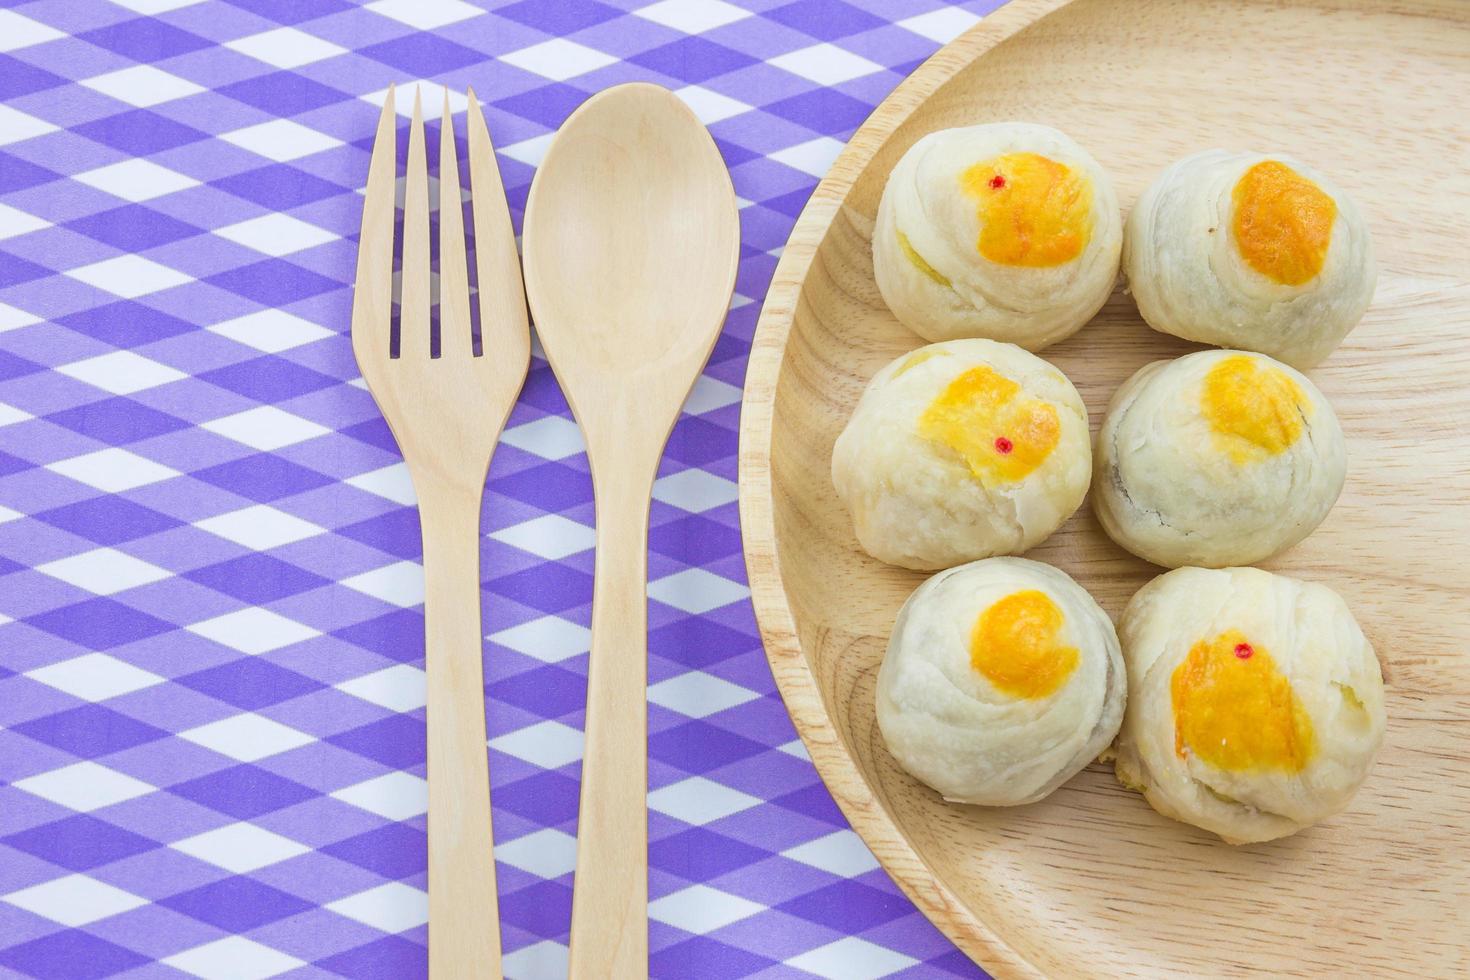 Chinese Pastry Mung Bean or Mooncake with Egg Yolk on wooden dish and spoon fork striped cloth photo